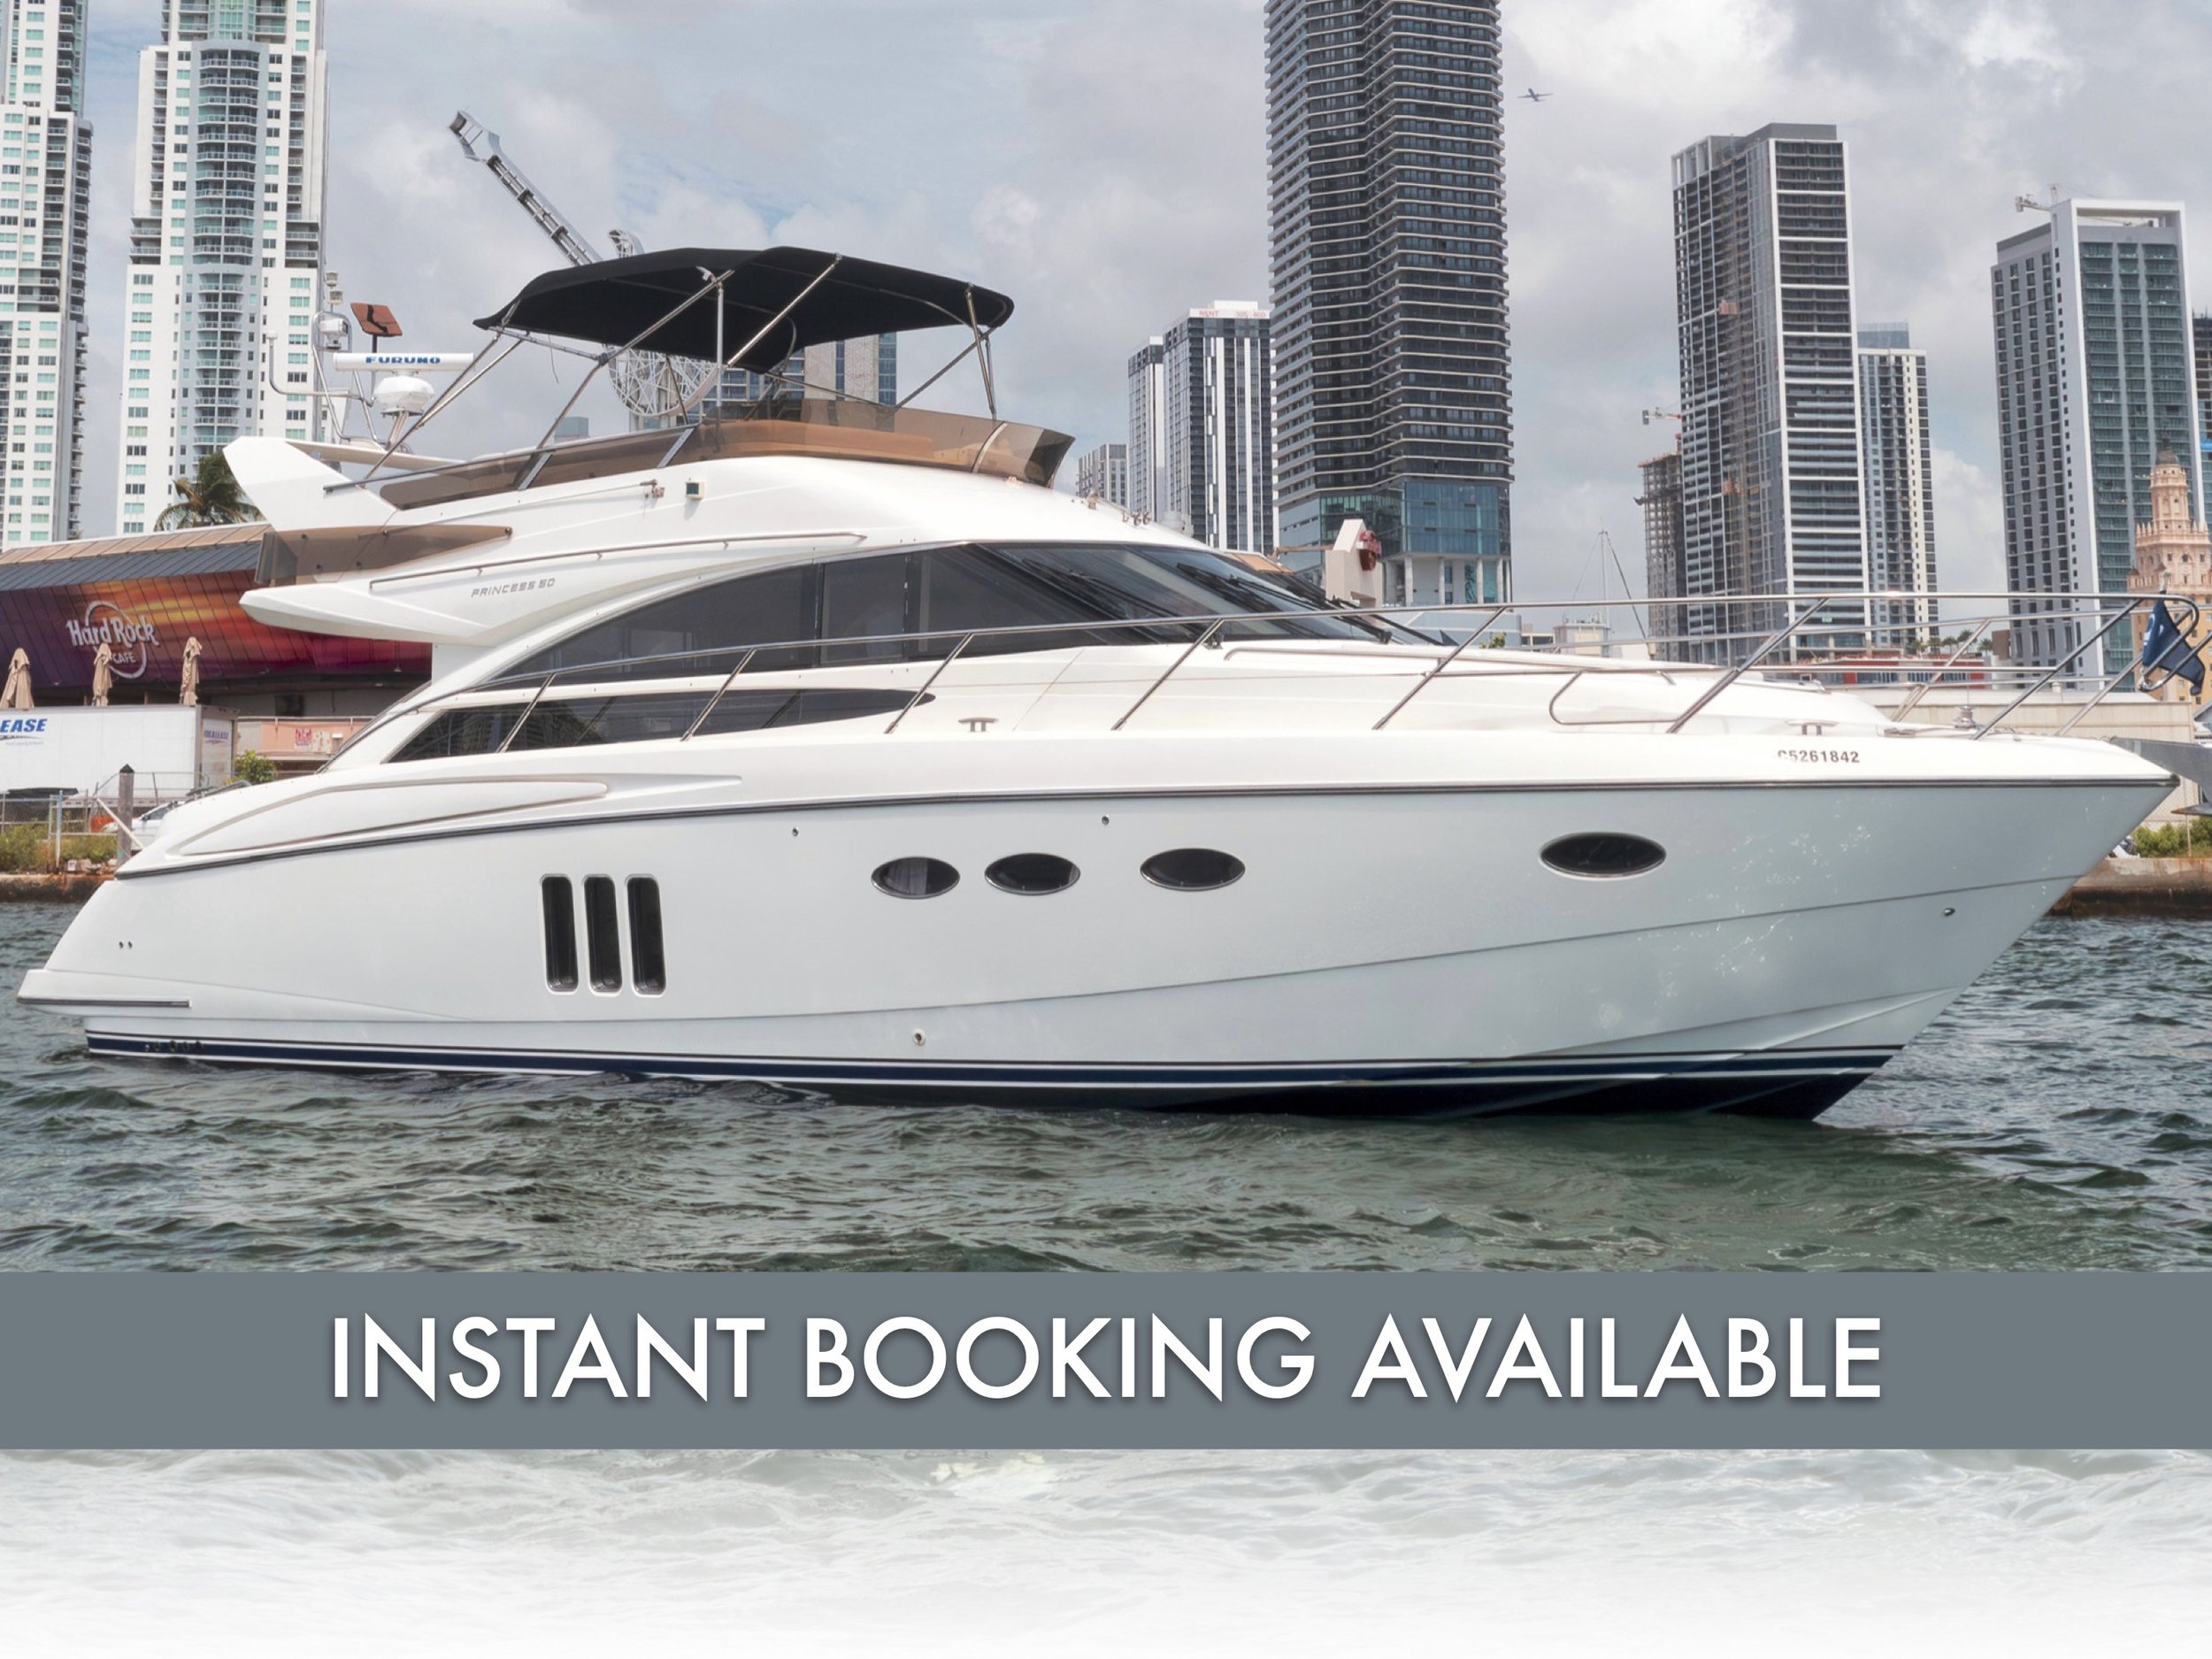 50 ft Princess | From $1950 | 13 guest max